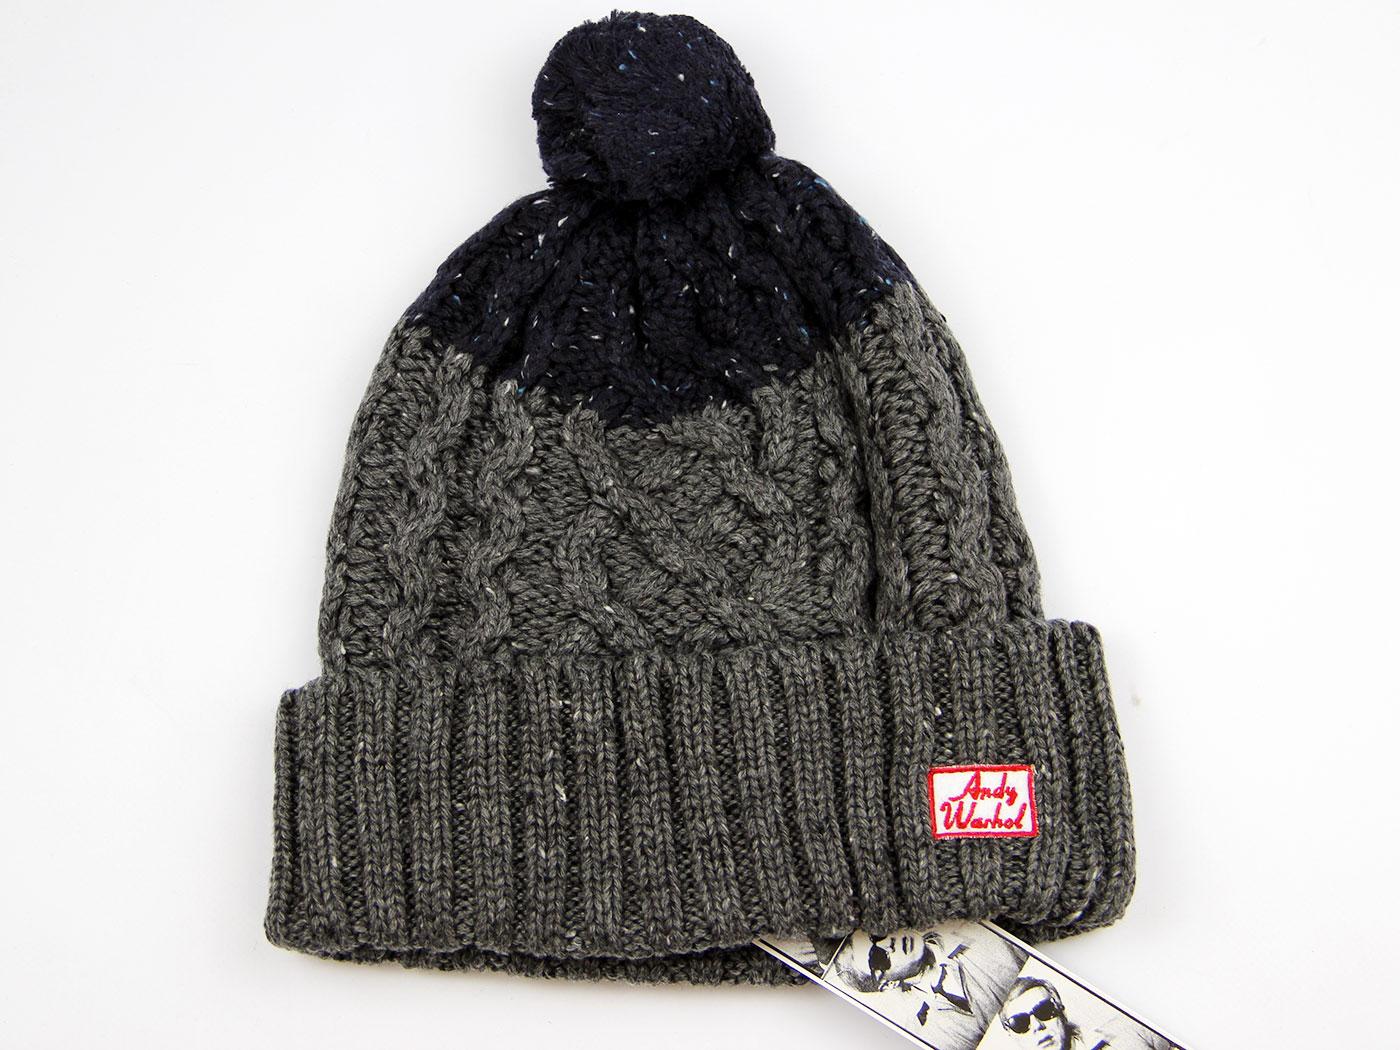 Fitzs ANDY WARHOL by PEPE JEANS Retro Bobble Hat 